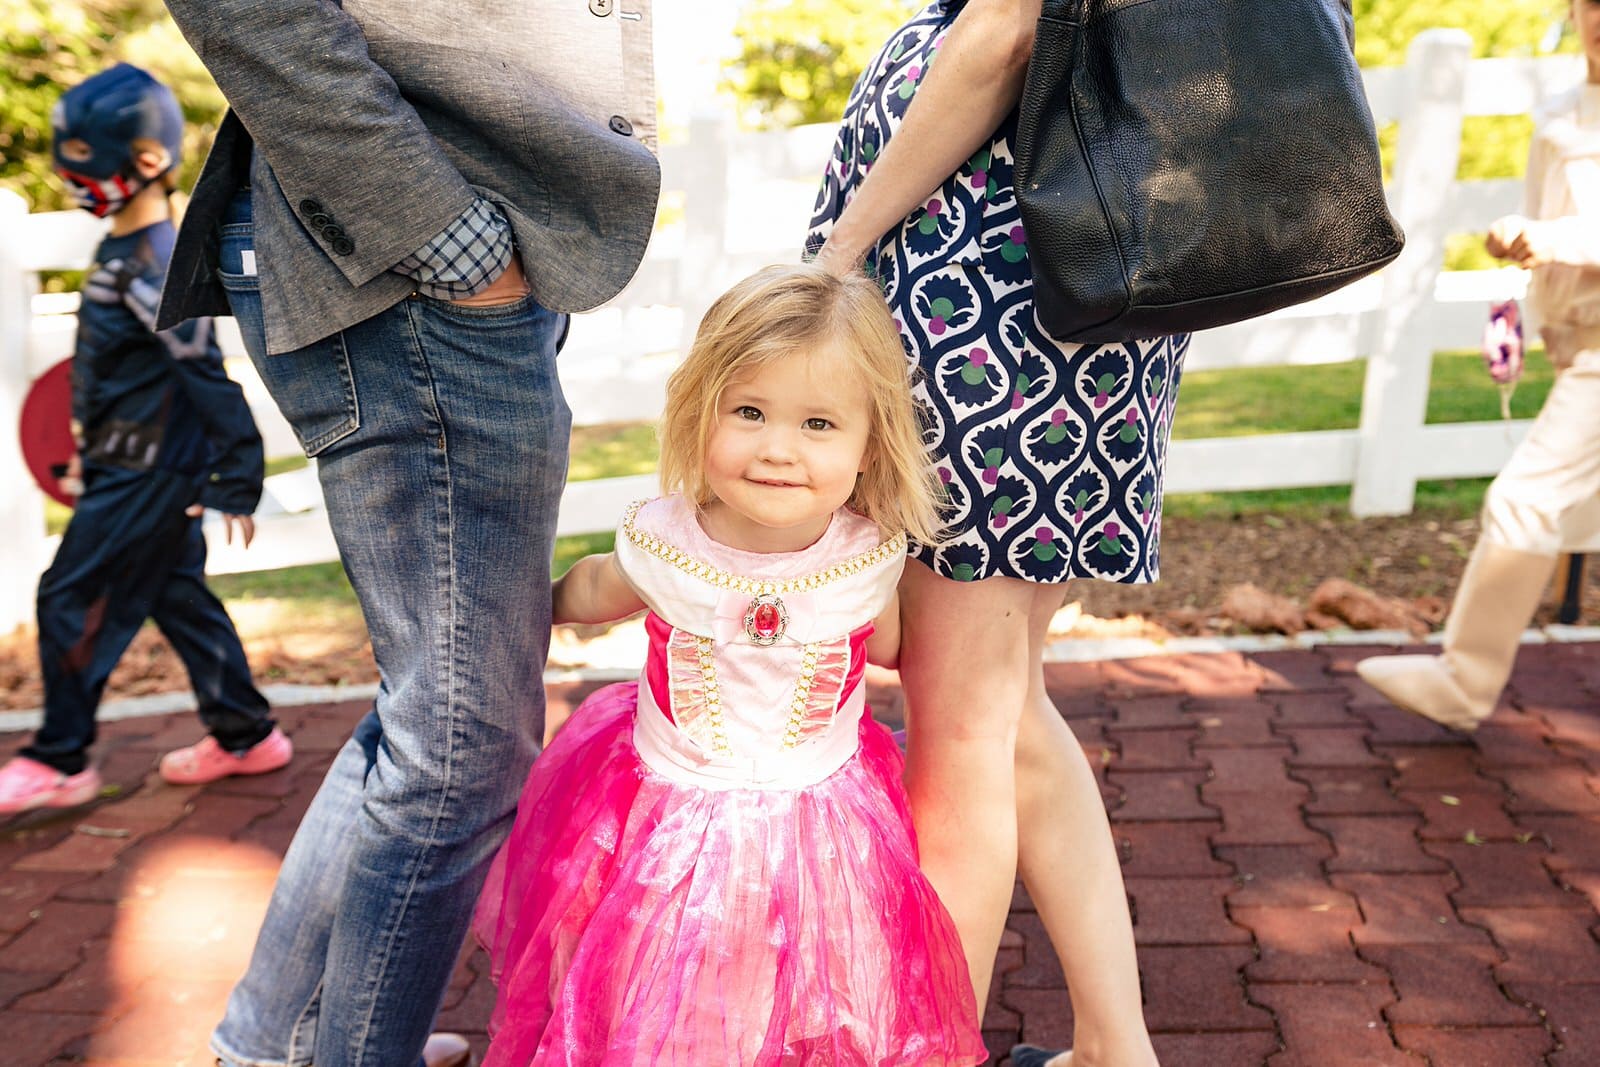 Have little kids dress up in costumes at your wedding - super fun for them and adorable pictures!